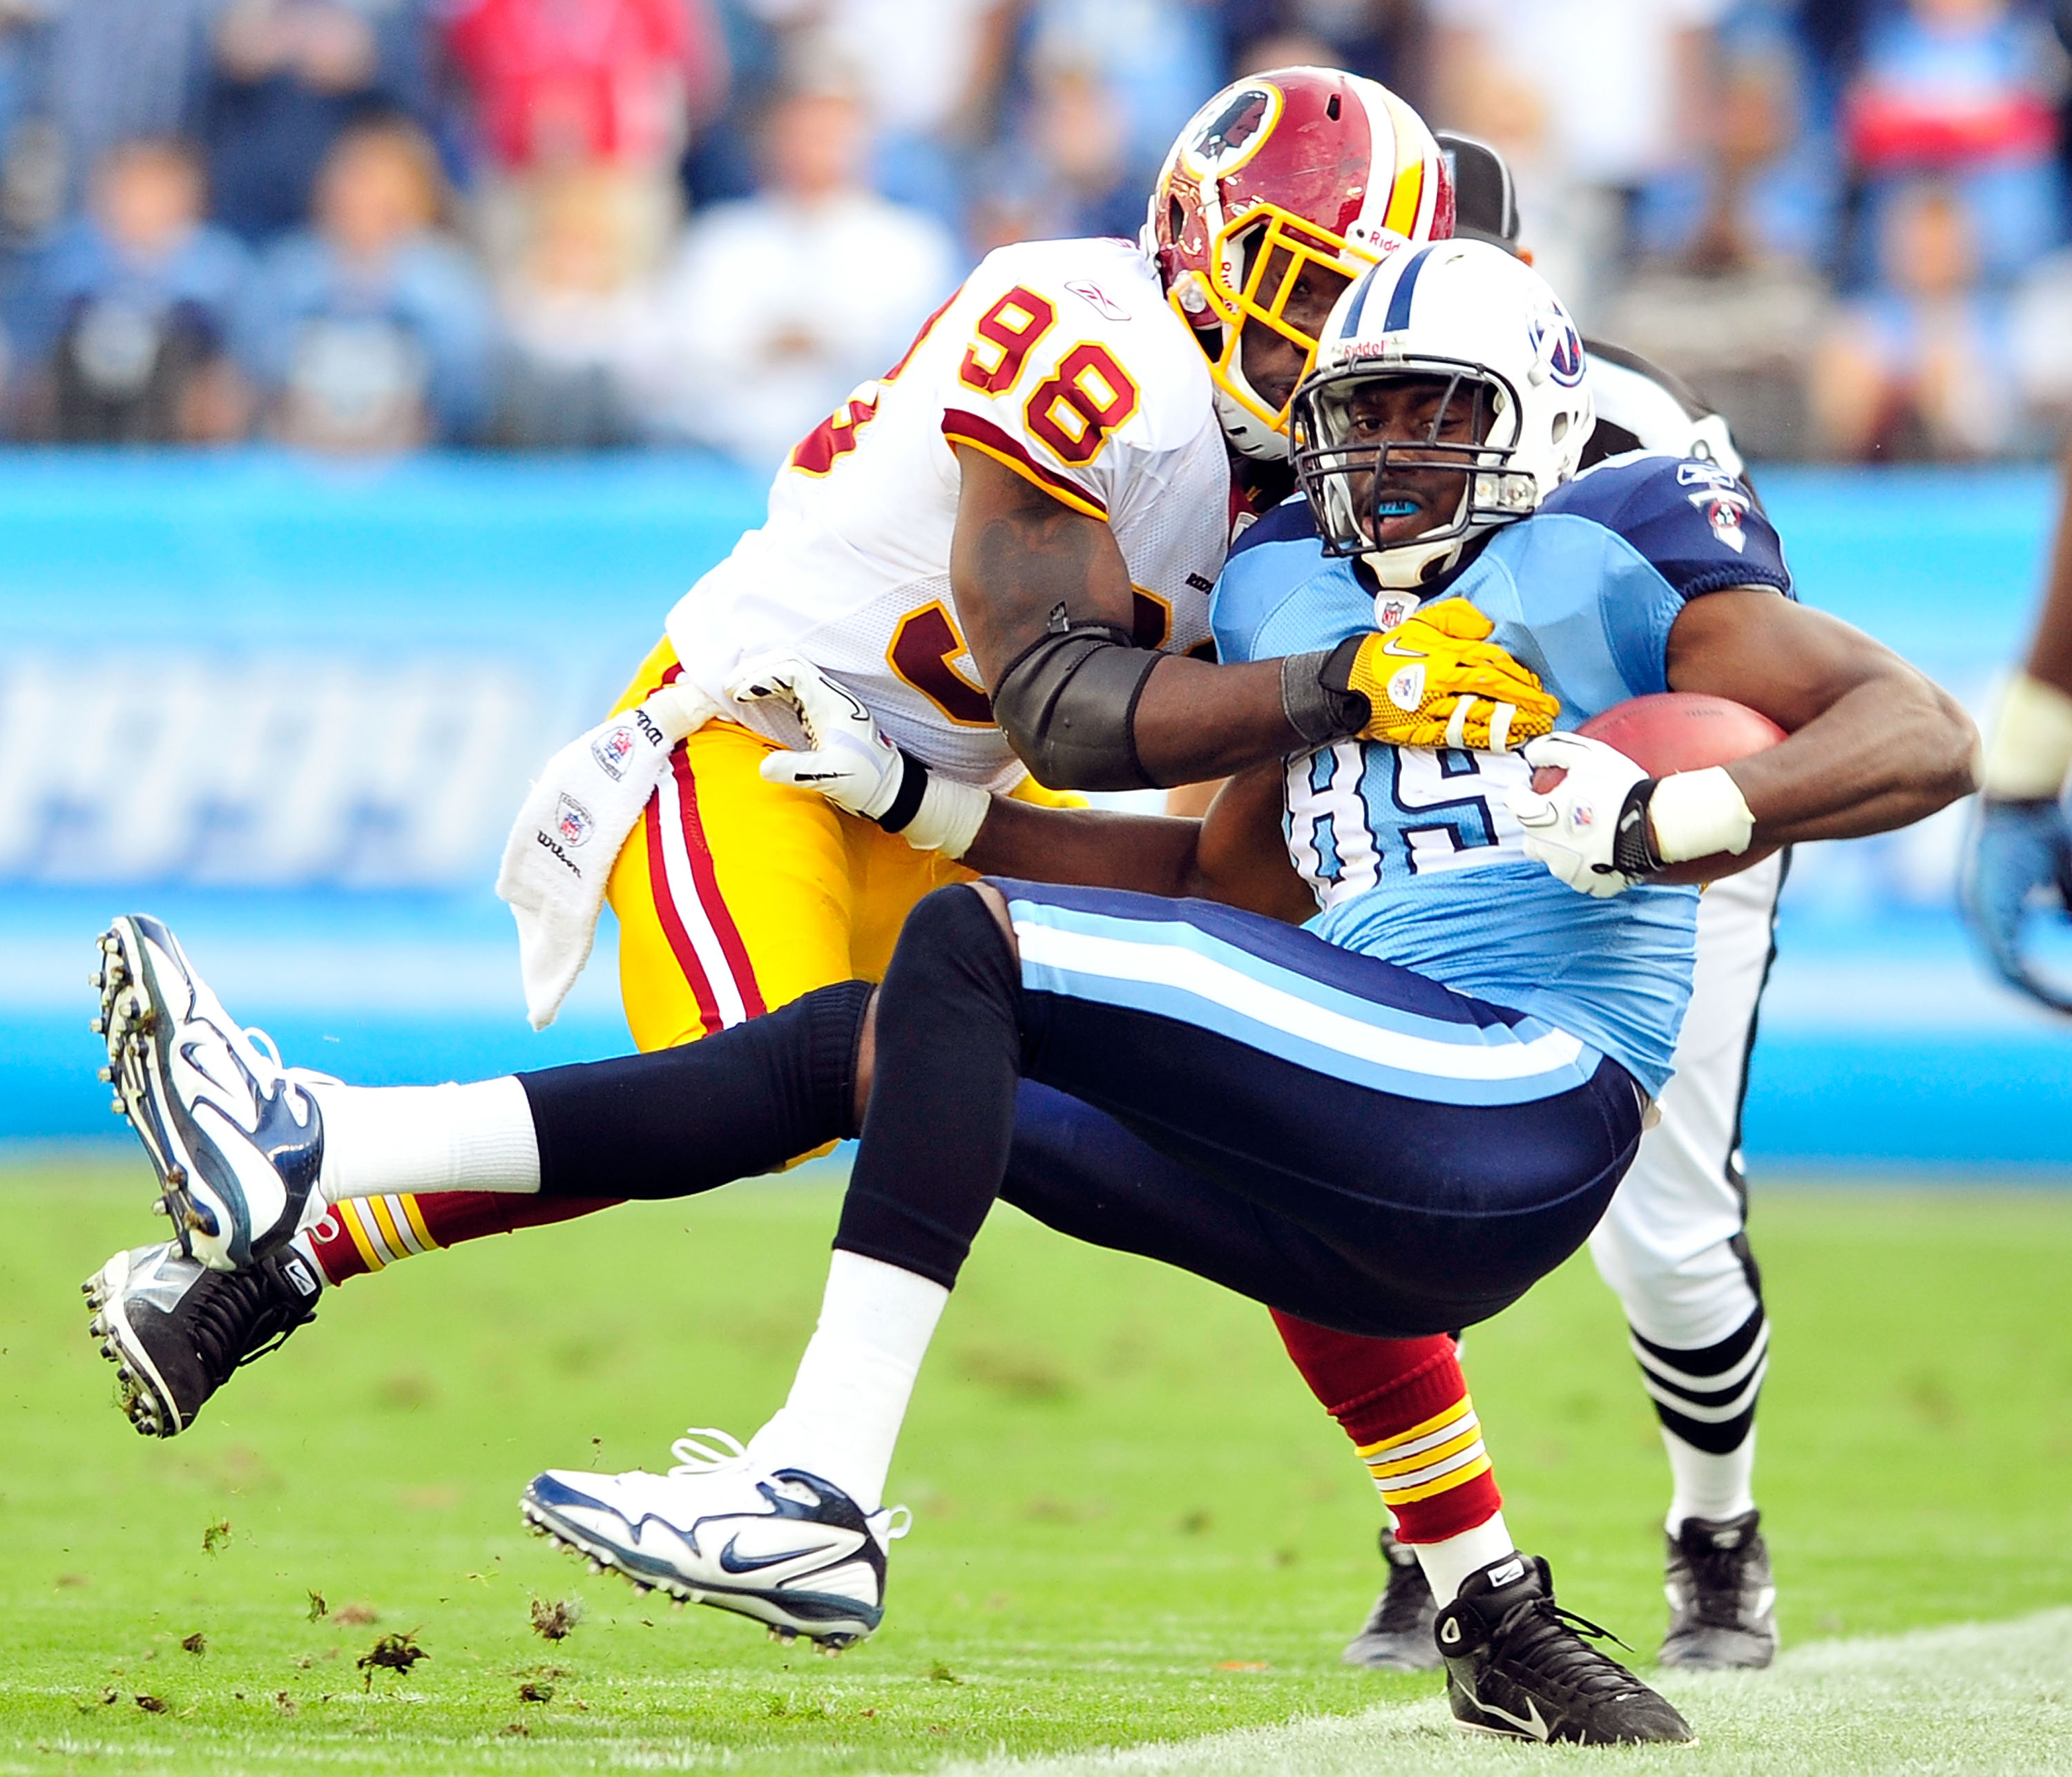 NASHVILLE, TN - NOVEMBER 21:  Brian Orakpo #98 of the Washington Redskins forces Jared Cook #89 of the Tennessee Titans out-of-bounds at LP Field on November 21, 2010 in Nashville, Tennessee. The Redskins won 19-16 in overtime.  (Photo by Grant Halverson/